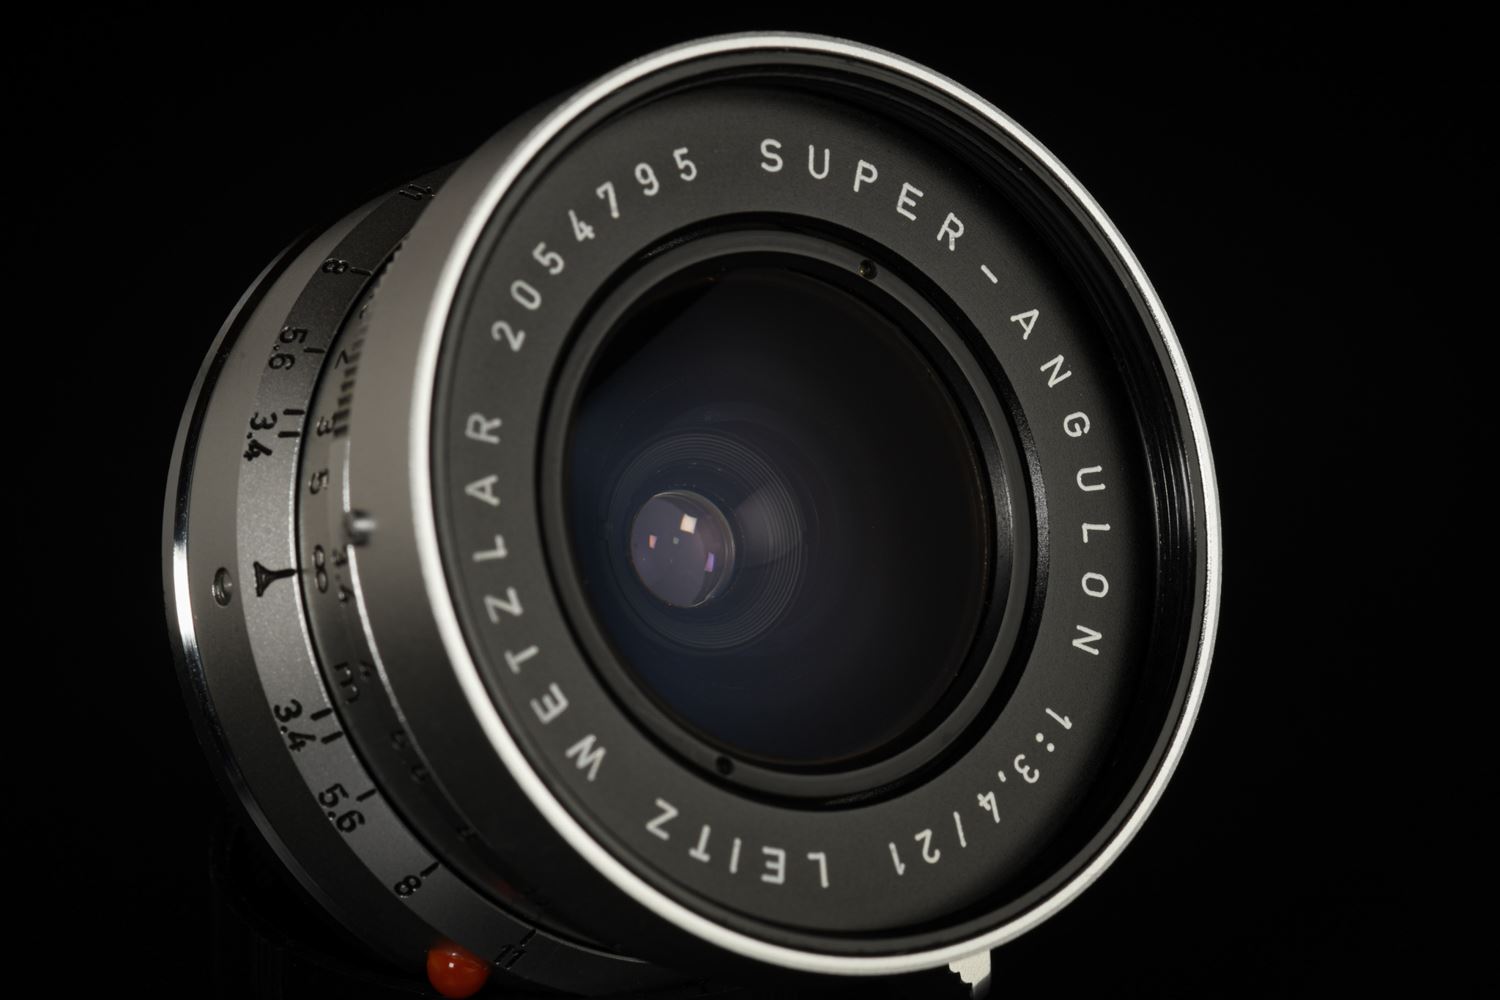 Picture of Leica Super-Angulon 21mm f/3.4 Silver with View Finder